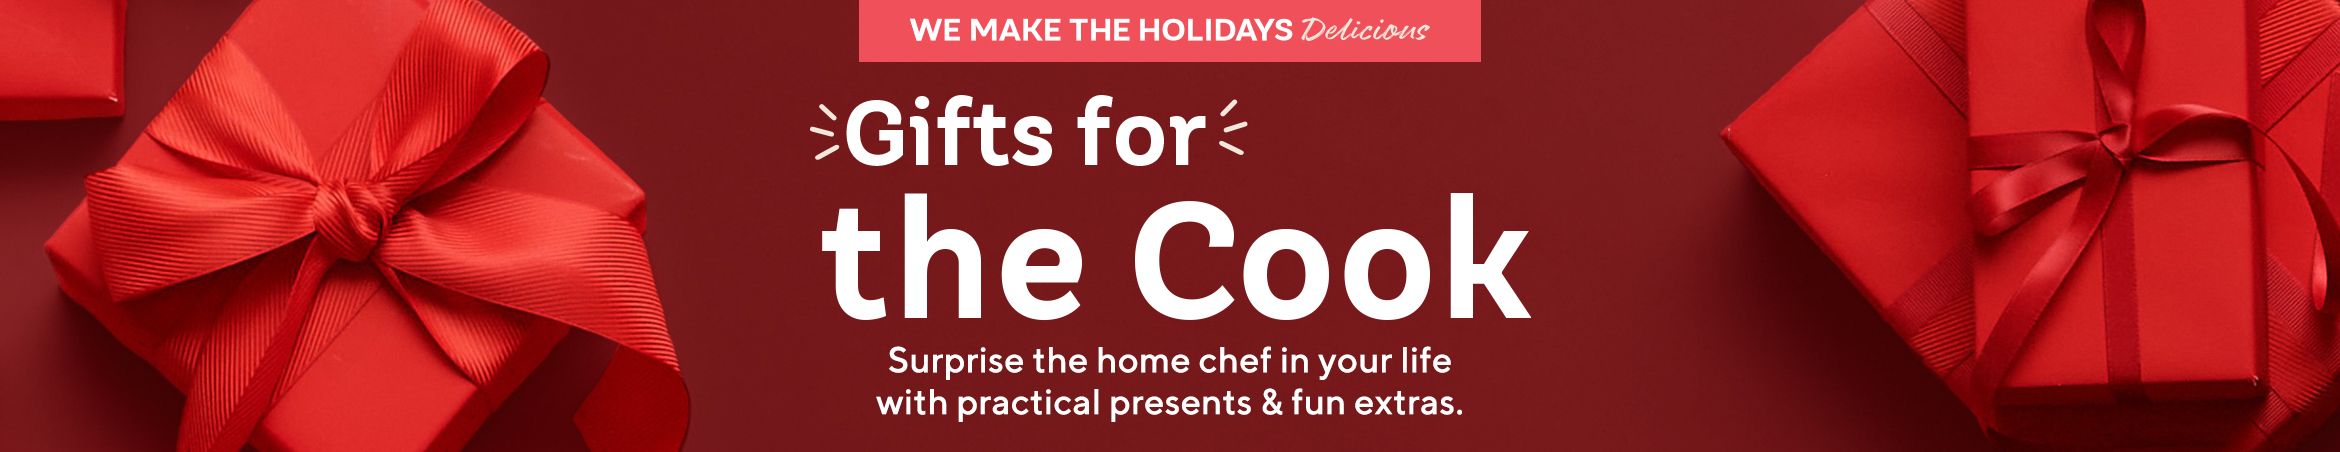 Gifts for the Cook  Surprise the home chef in your life with practical presents & fun extras.